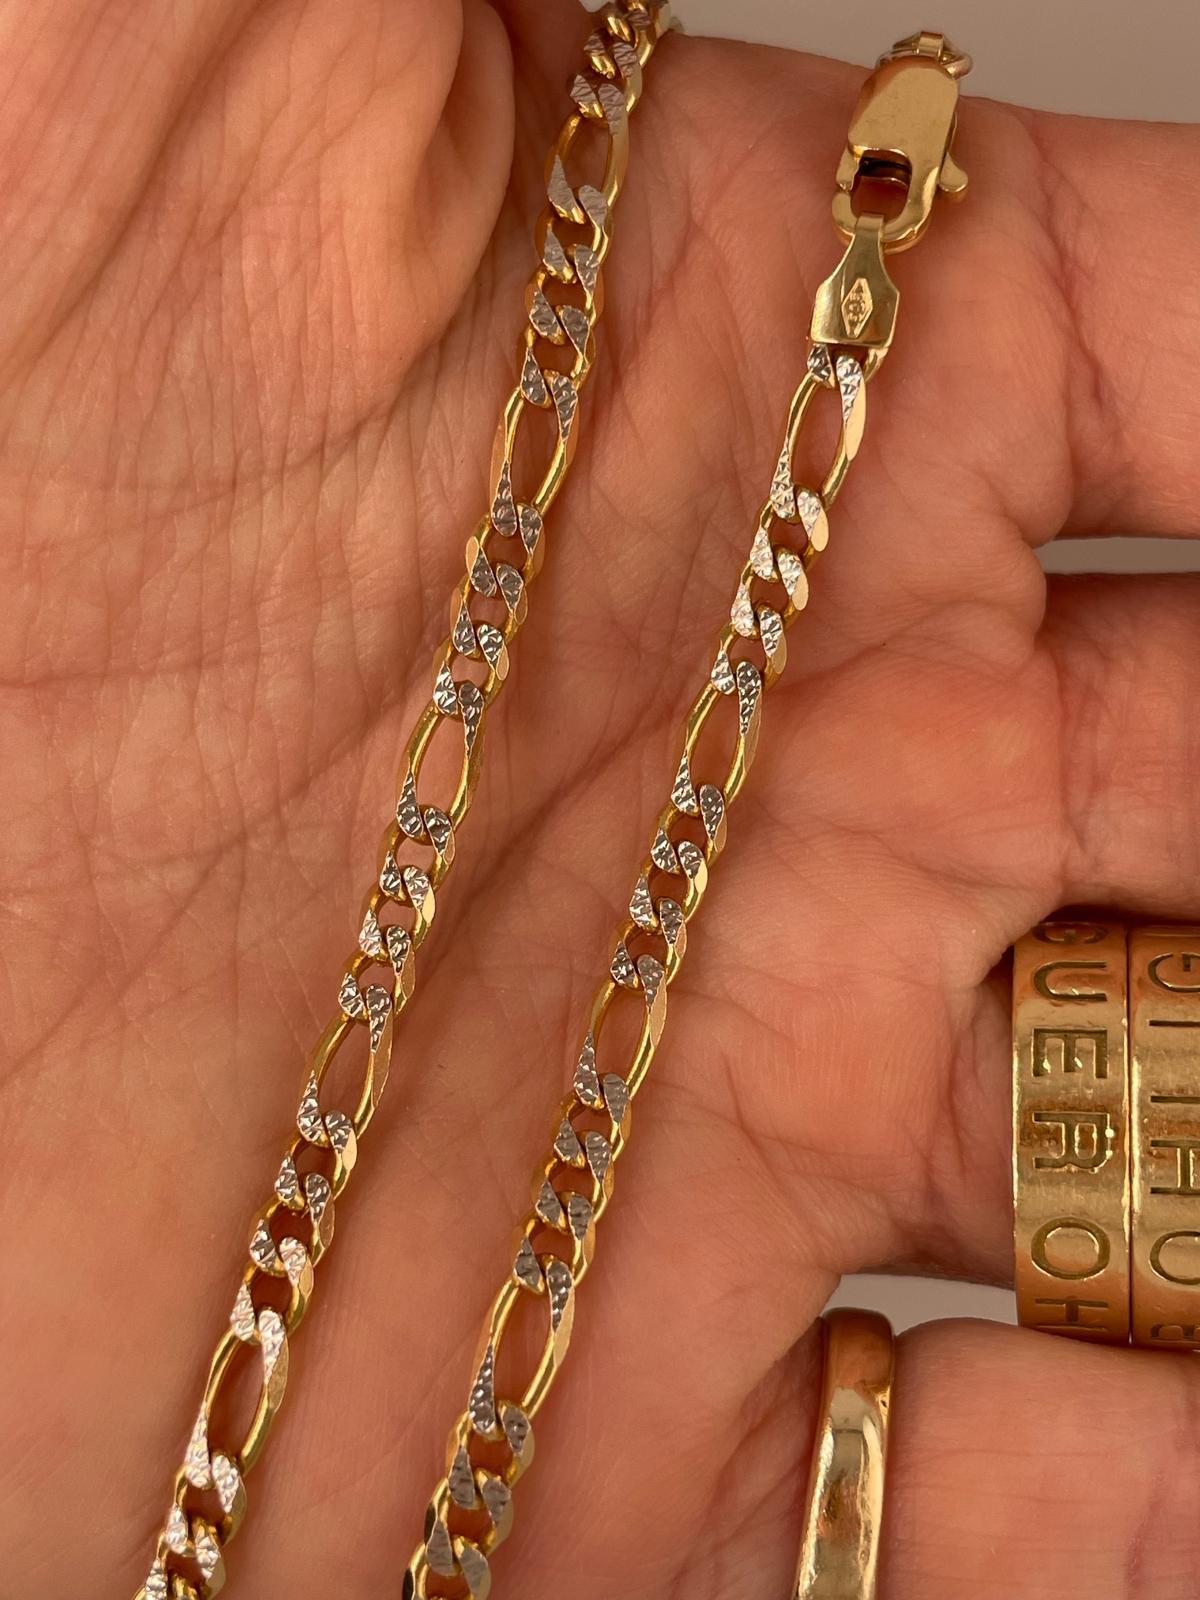 18k yellow gold curb link style chain with white gold detail  12